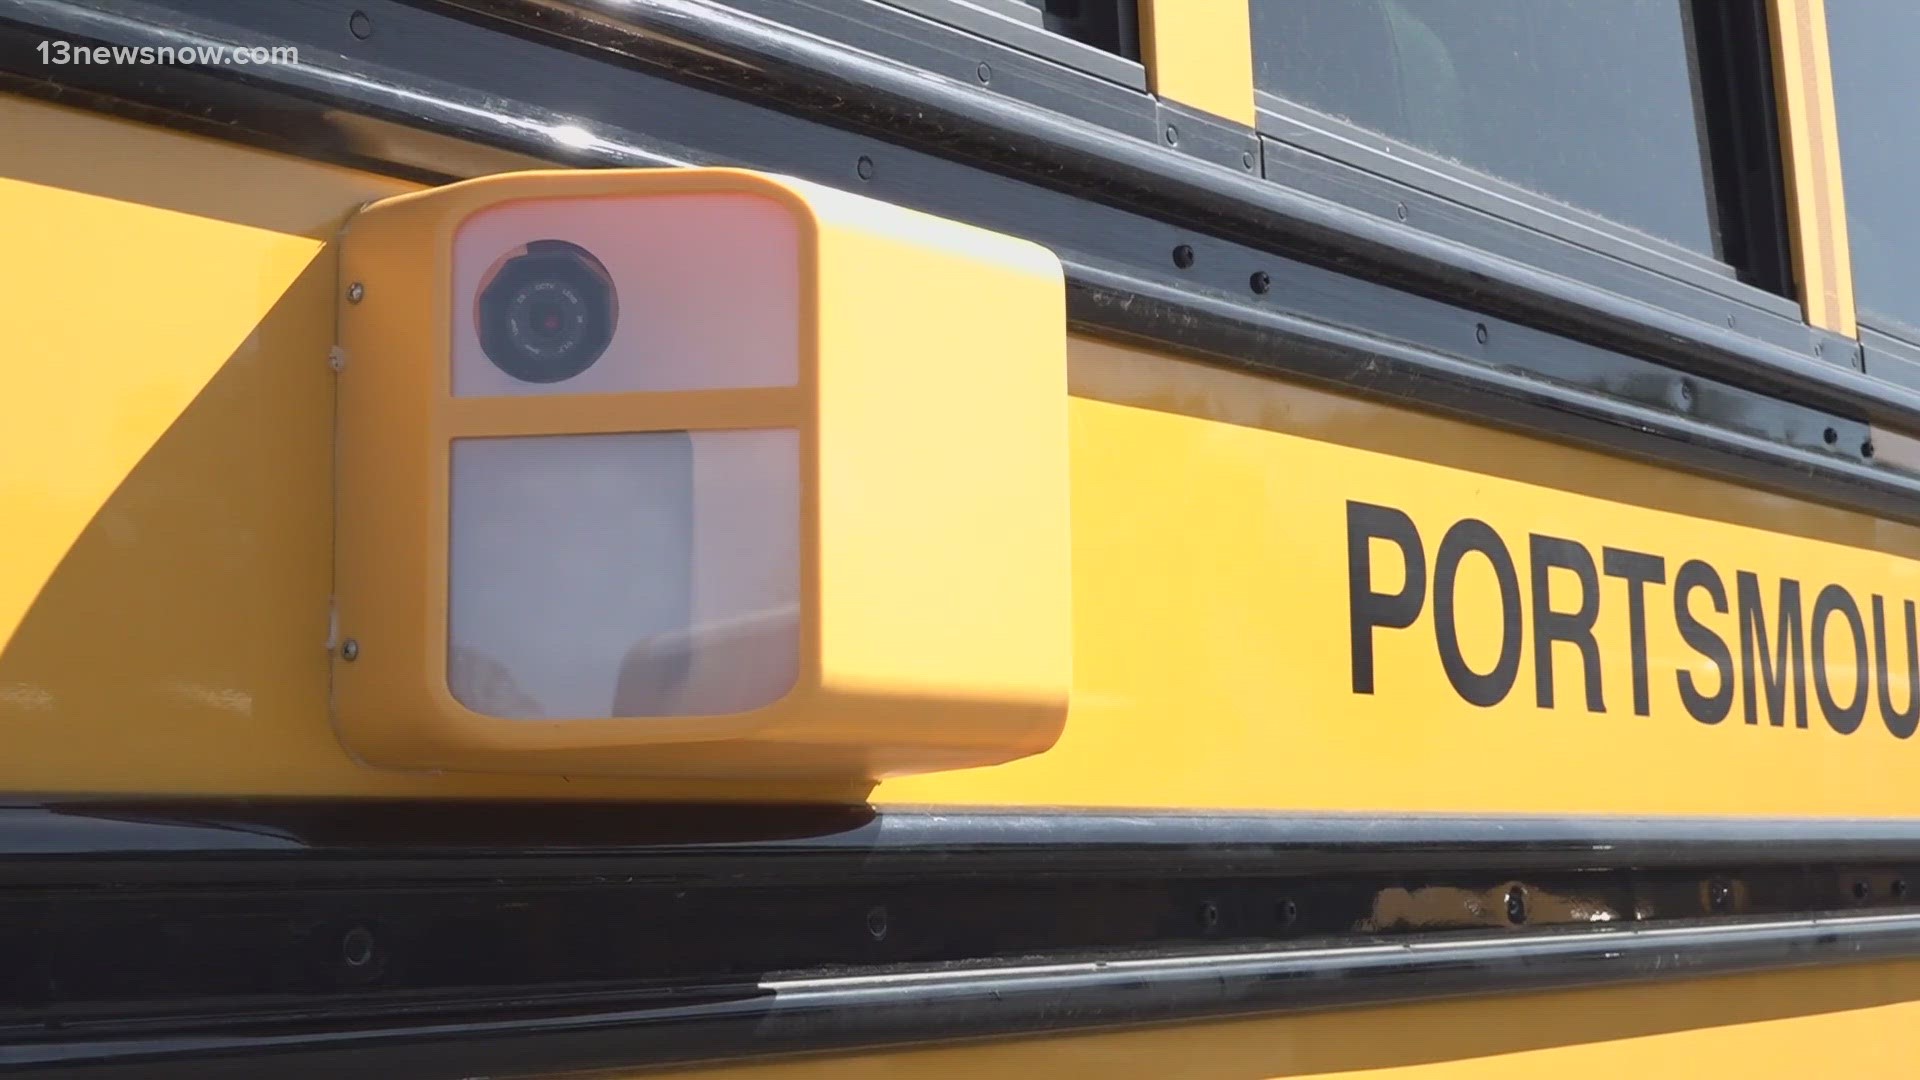 Ten school bus cameras went live on Monday. Brenna McIntosh has the details on the new technology.